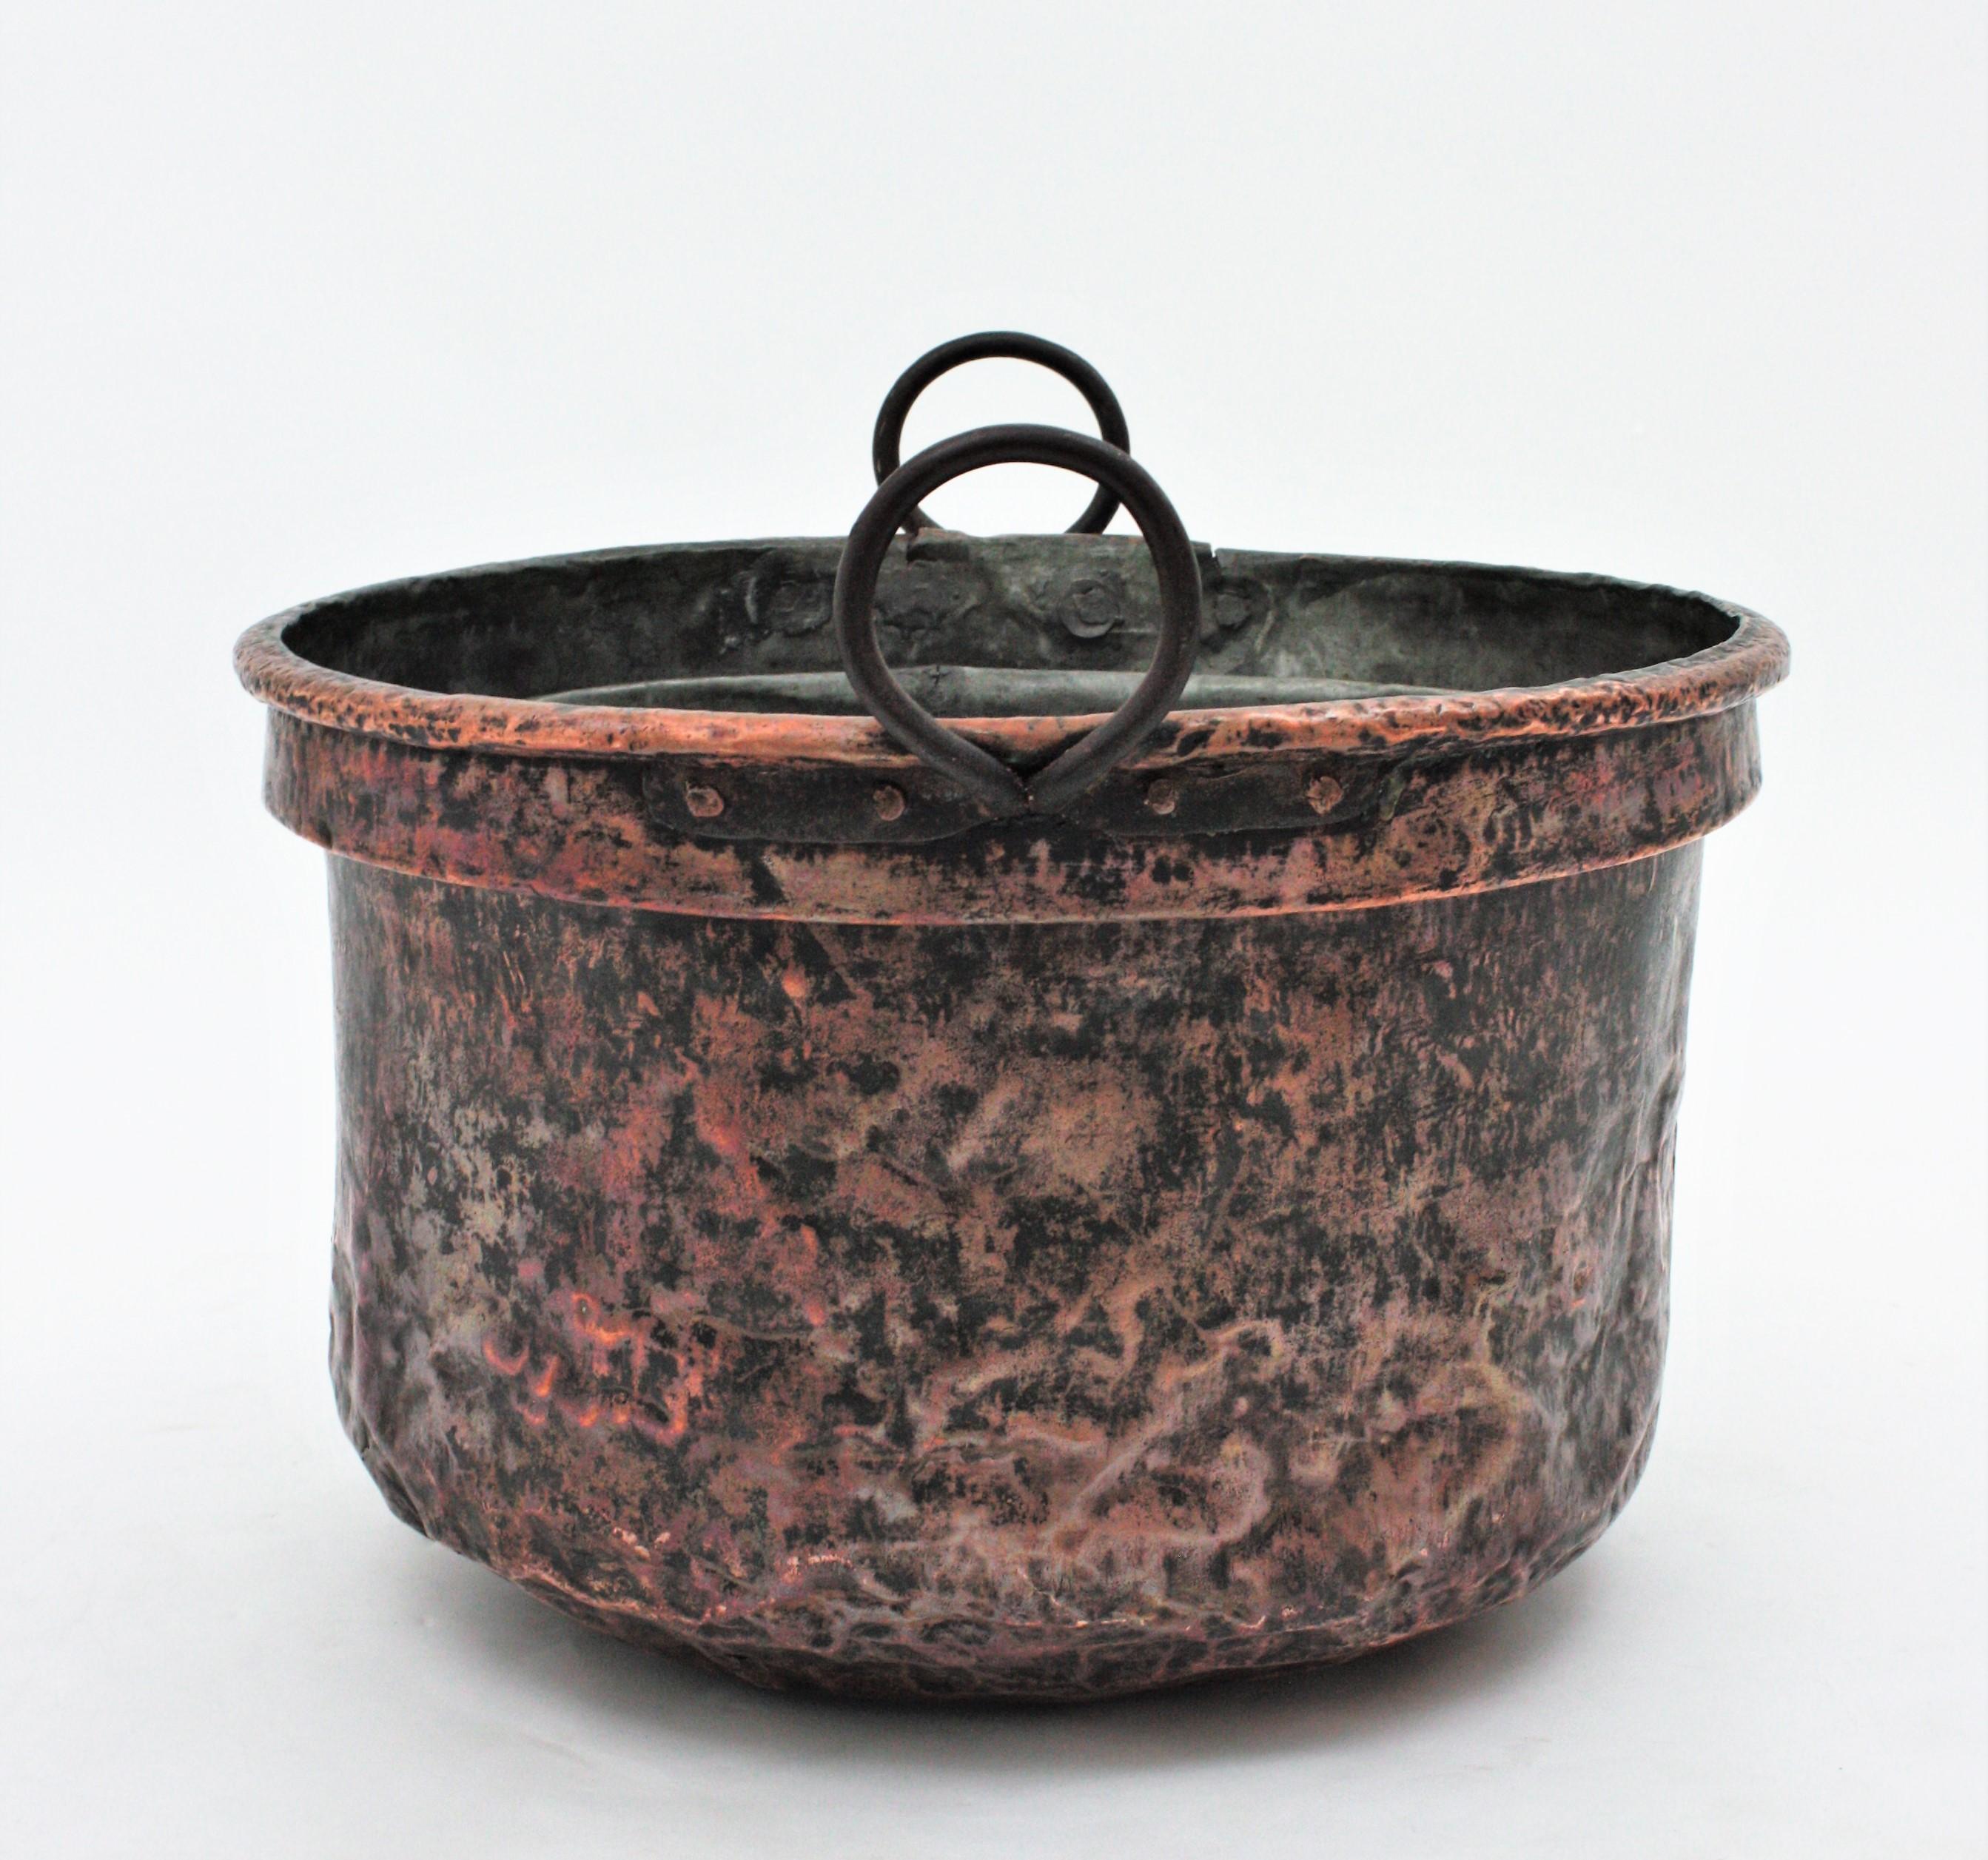 Massive 19th Century French Copper Cauldron with Handles and Terrific Patina 5